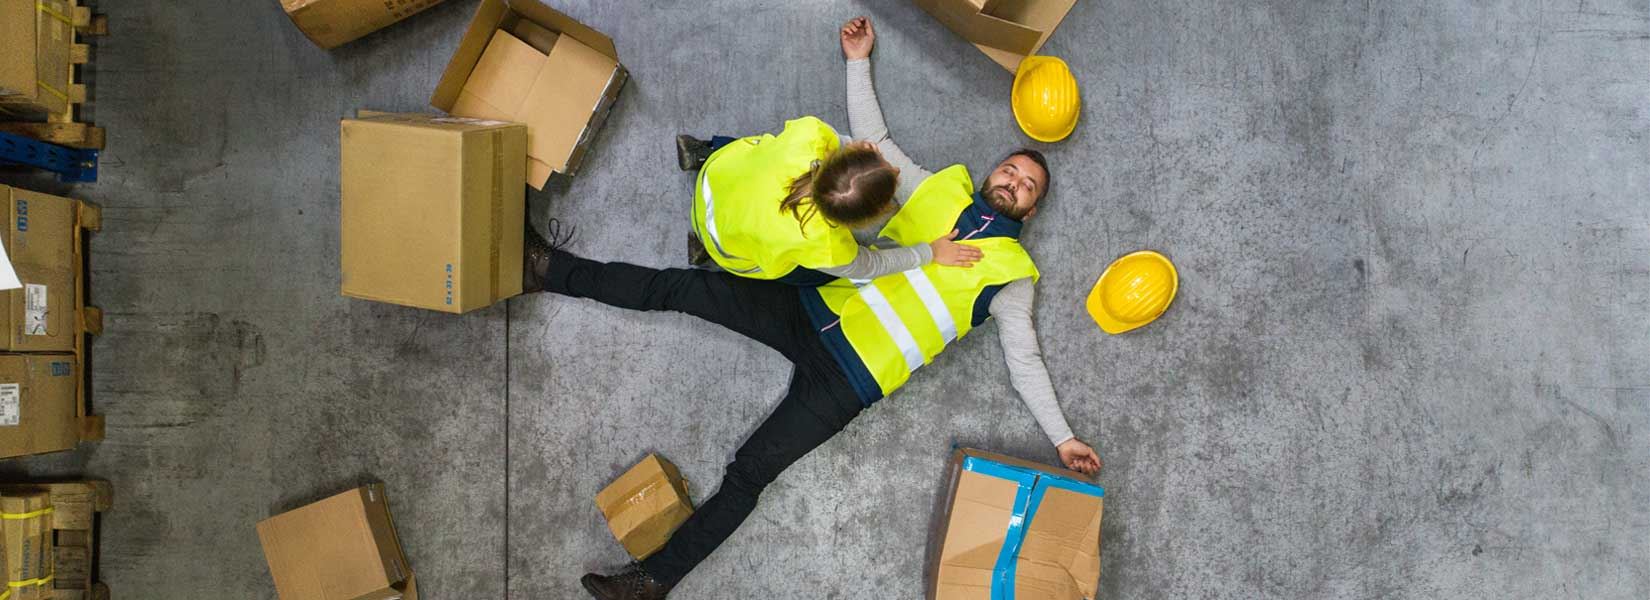 A construction worker on the ground after a fall